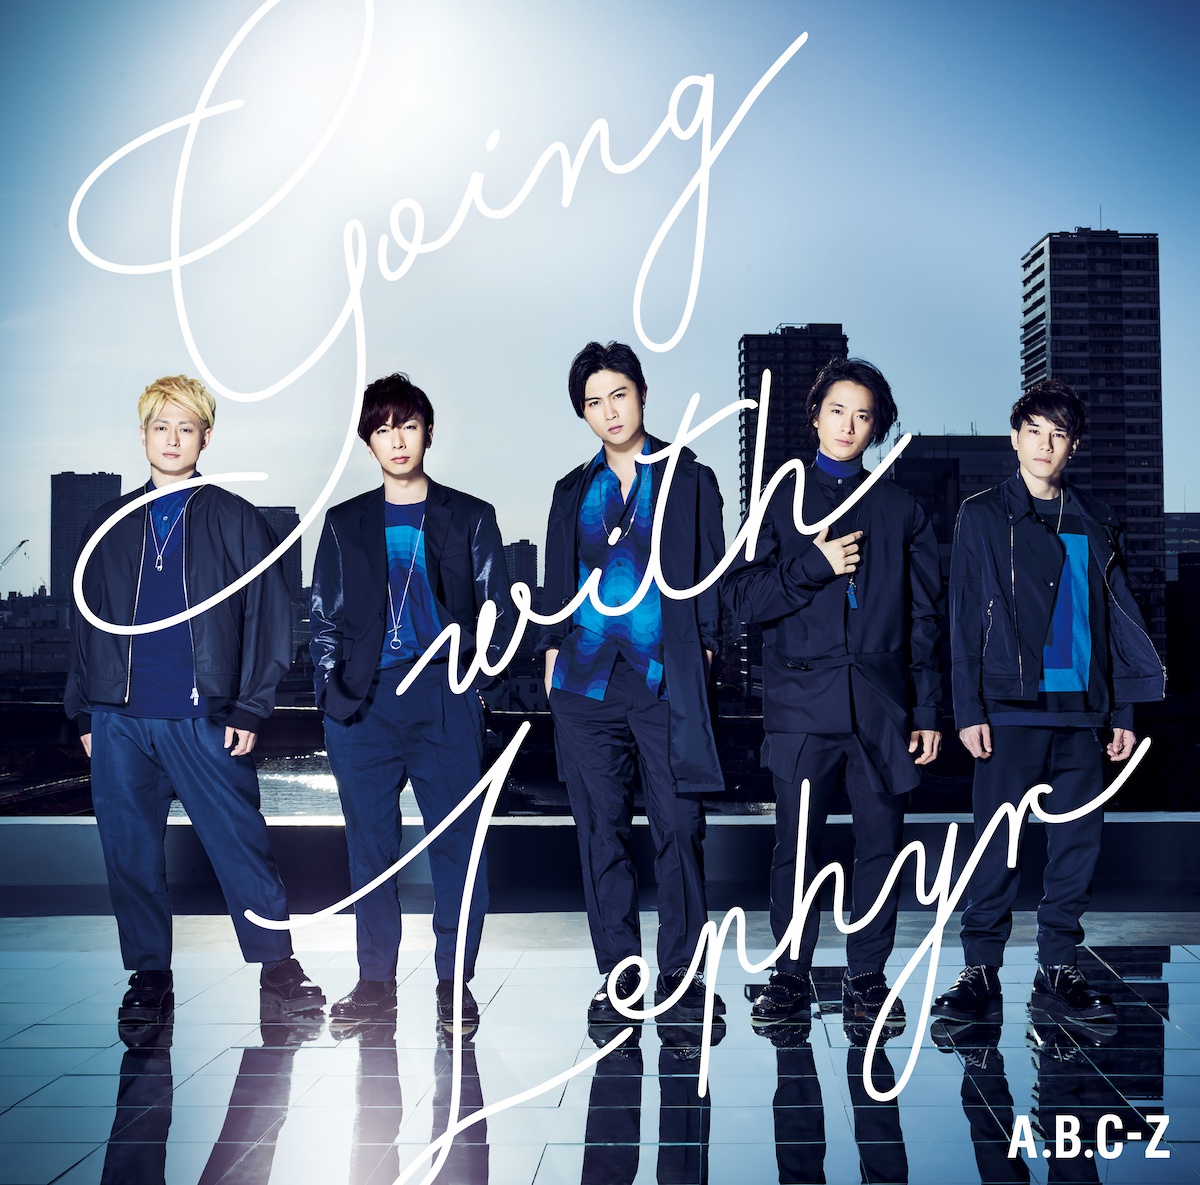 『A.B.C-Z - Man And Woman』収録の『Going with Zephyr』ジャケット